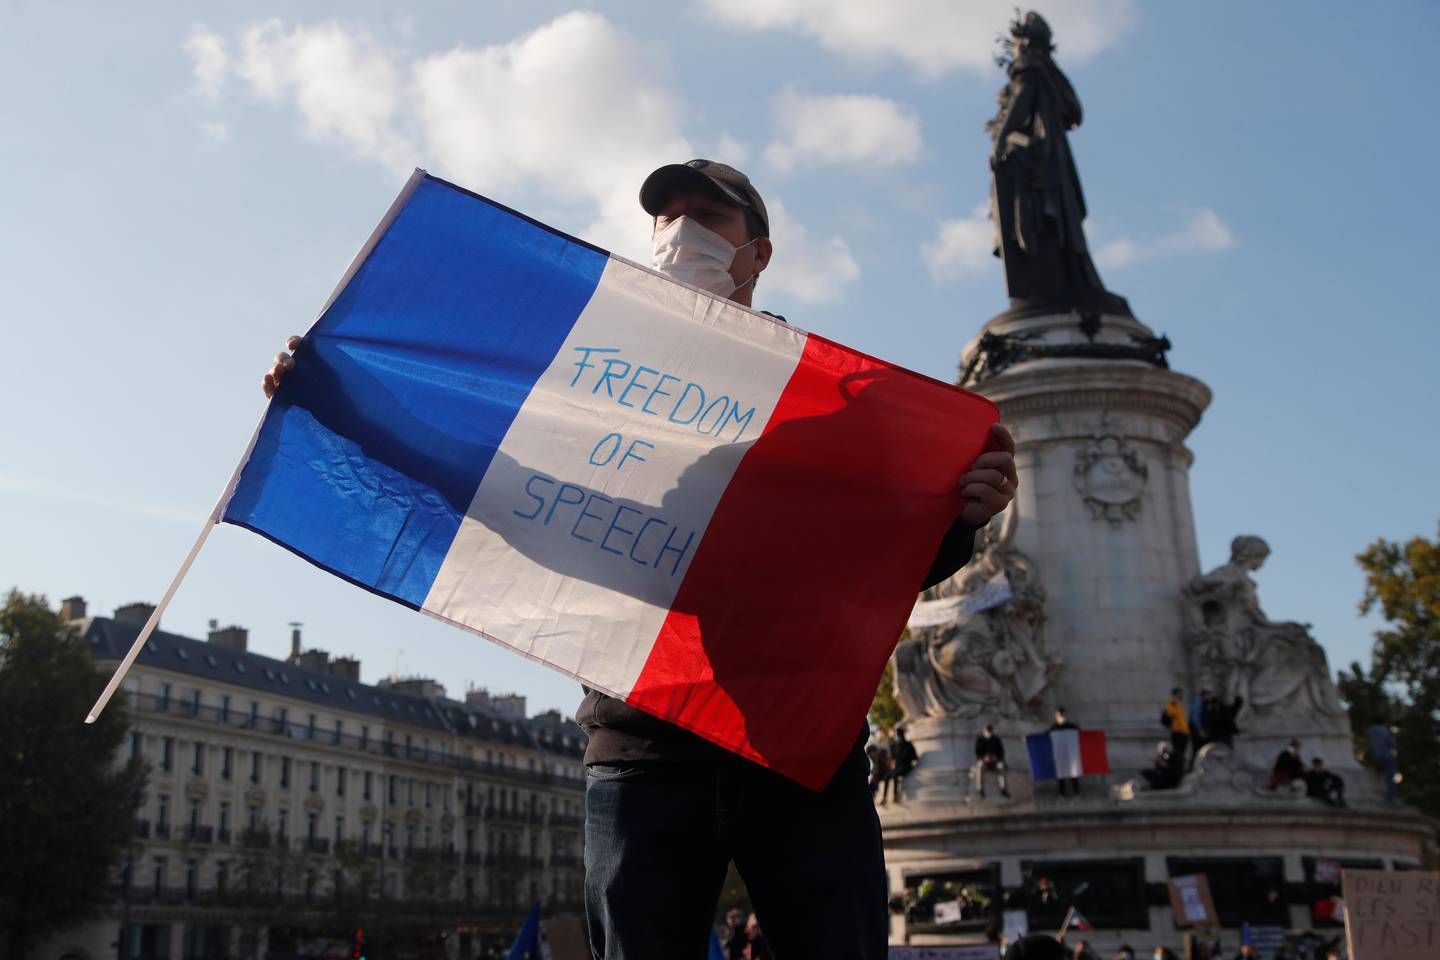 A demonstrator holds a French flag with the slogan "Freedom of Speech" during a demonstration Sunday Oct. 18, 2020 in Paris. Demonstrations around France have been called in support of freedom of speech and to pay tribute to a French history teacher who was beheaded near Paris after discussing caricatures of Islam's Prophet Muhammad with his class. Samuel Paty was beheaded on Friday by a 18-year-old Moscow-born Chechen refugee who was shot dead by police. (AP Photo/Michel Euler)